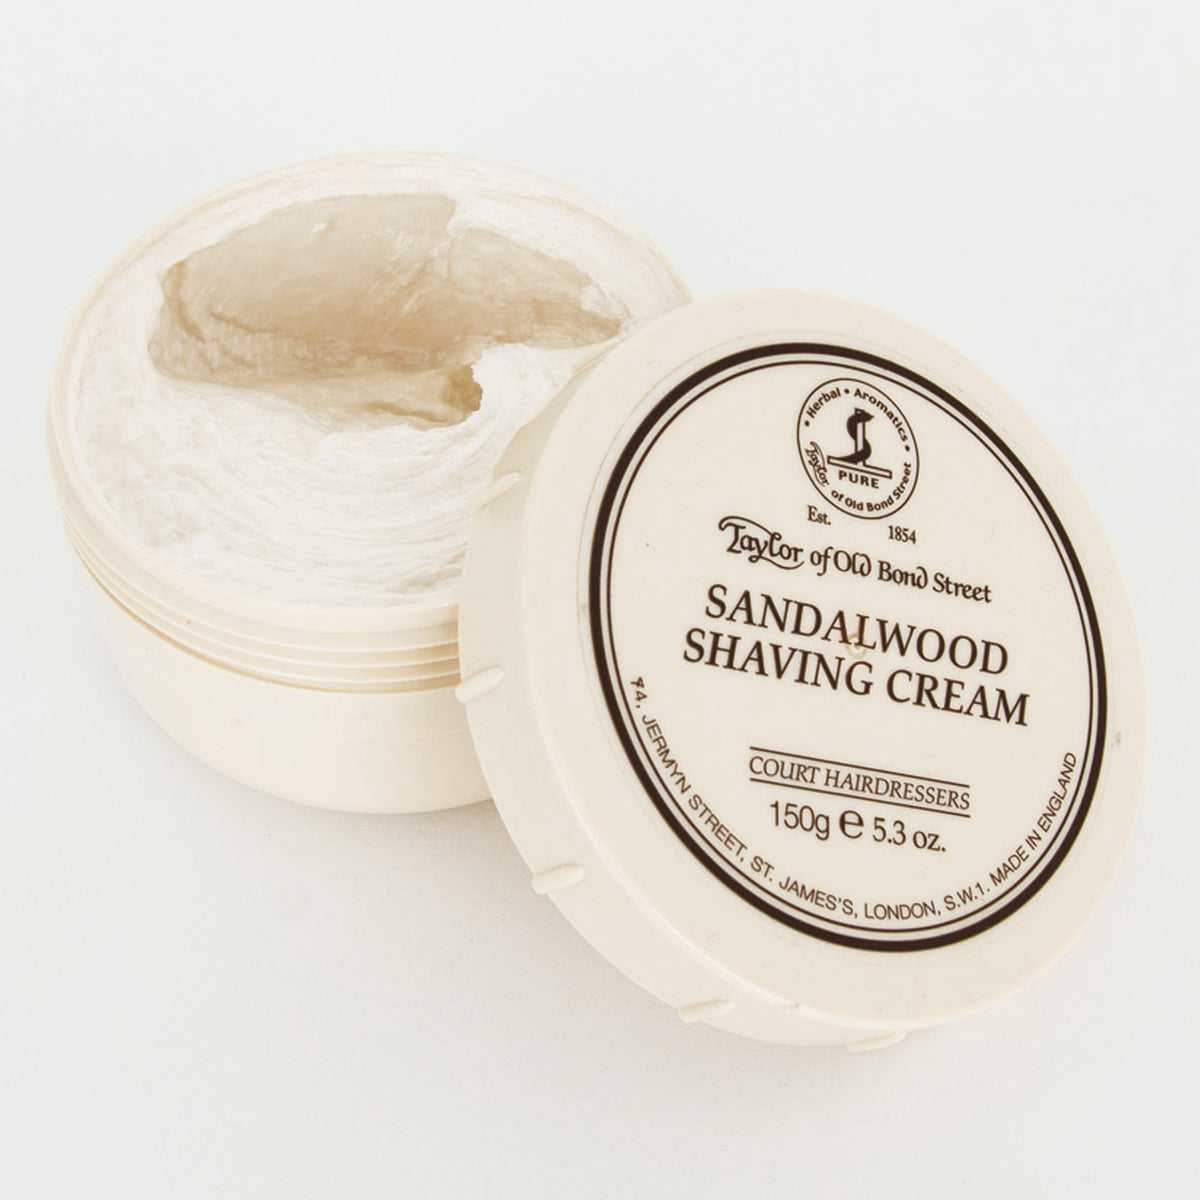 A container of Sandalwood Shaving Cream Bowl by Taylor of Old Bond Street on a white surface.